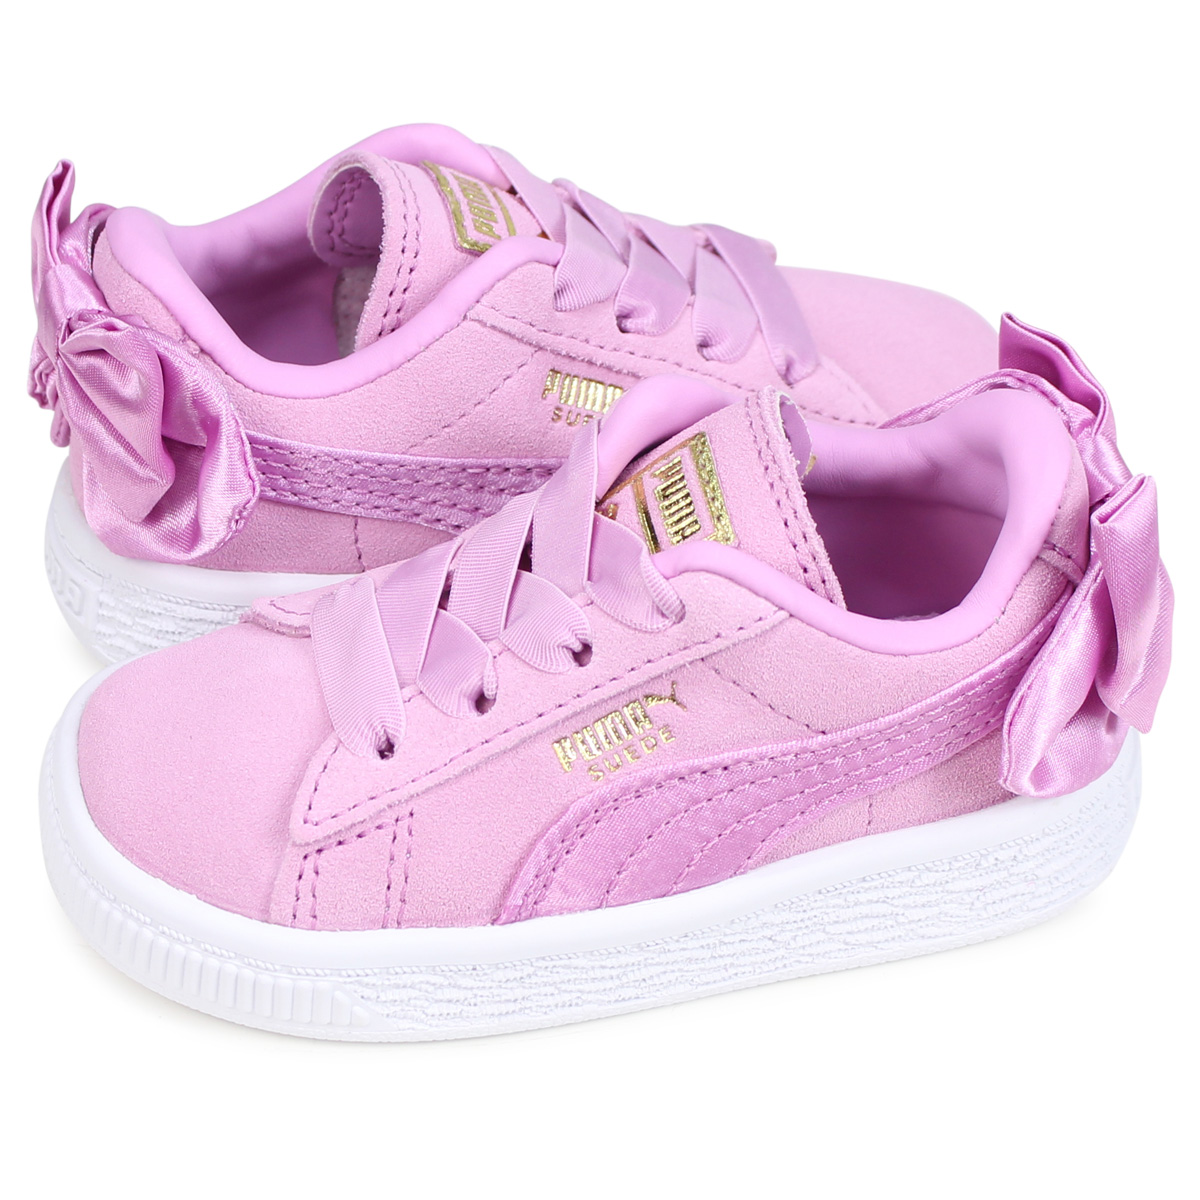 AC INF Puma suede bow tie sneakers 